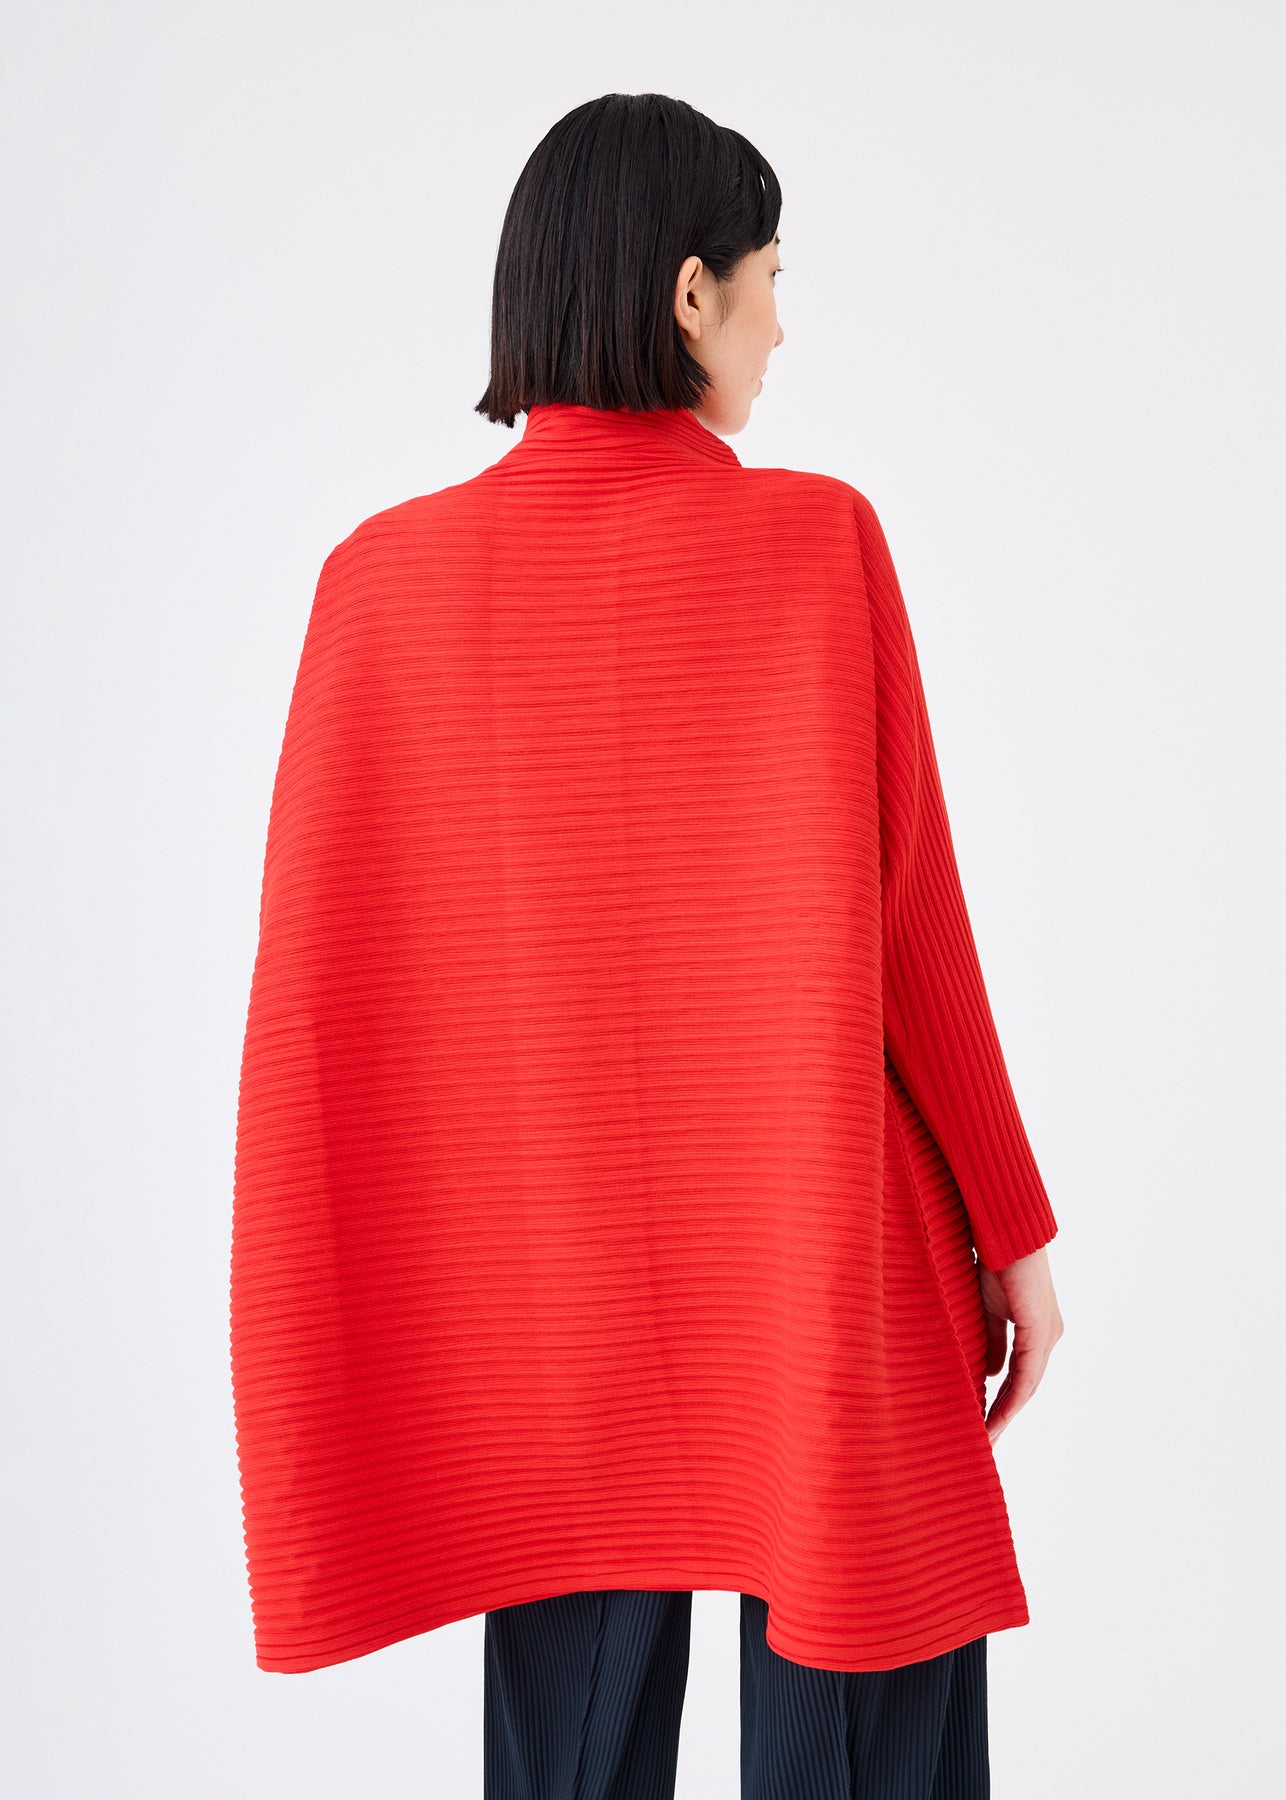 CORDUROY PLEATS CARDIGAN | The official ISSEY MIYAKE ONLINE STORE